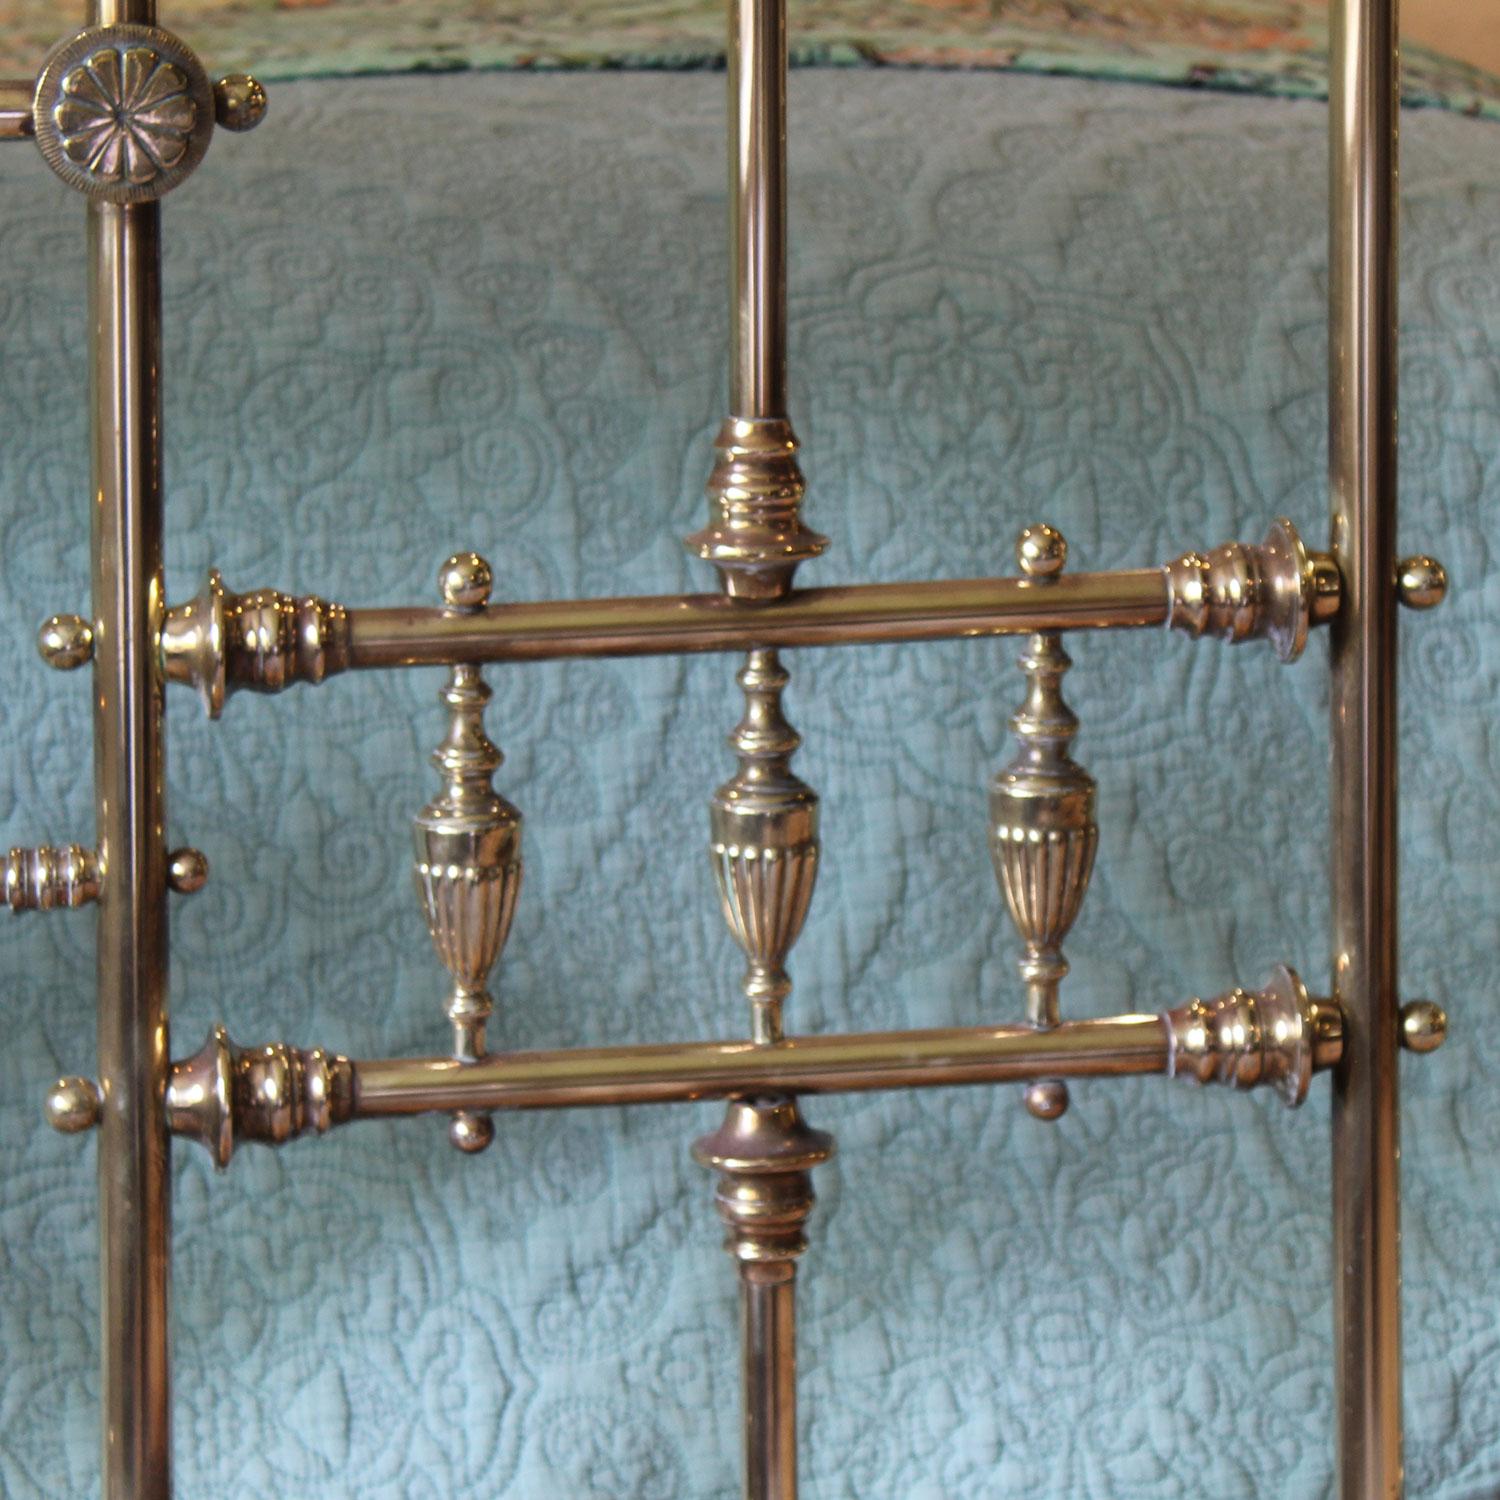 Decorative Victorian All Brass Antique Bed MK306 In Good Condition For Sale In Wrexham, GB